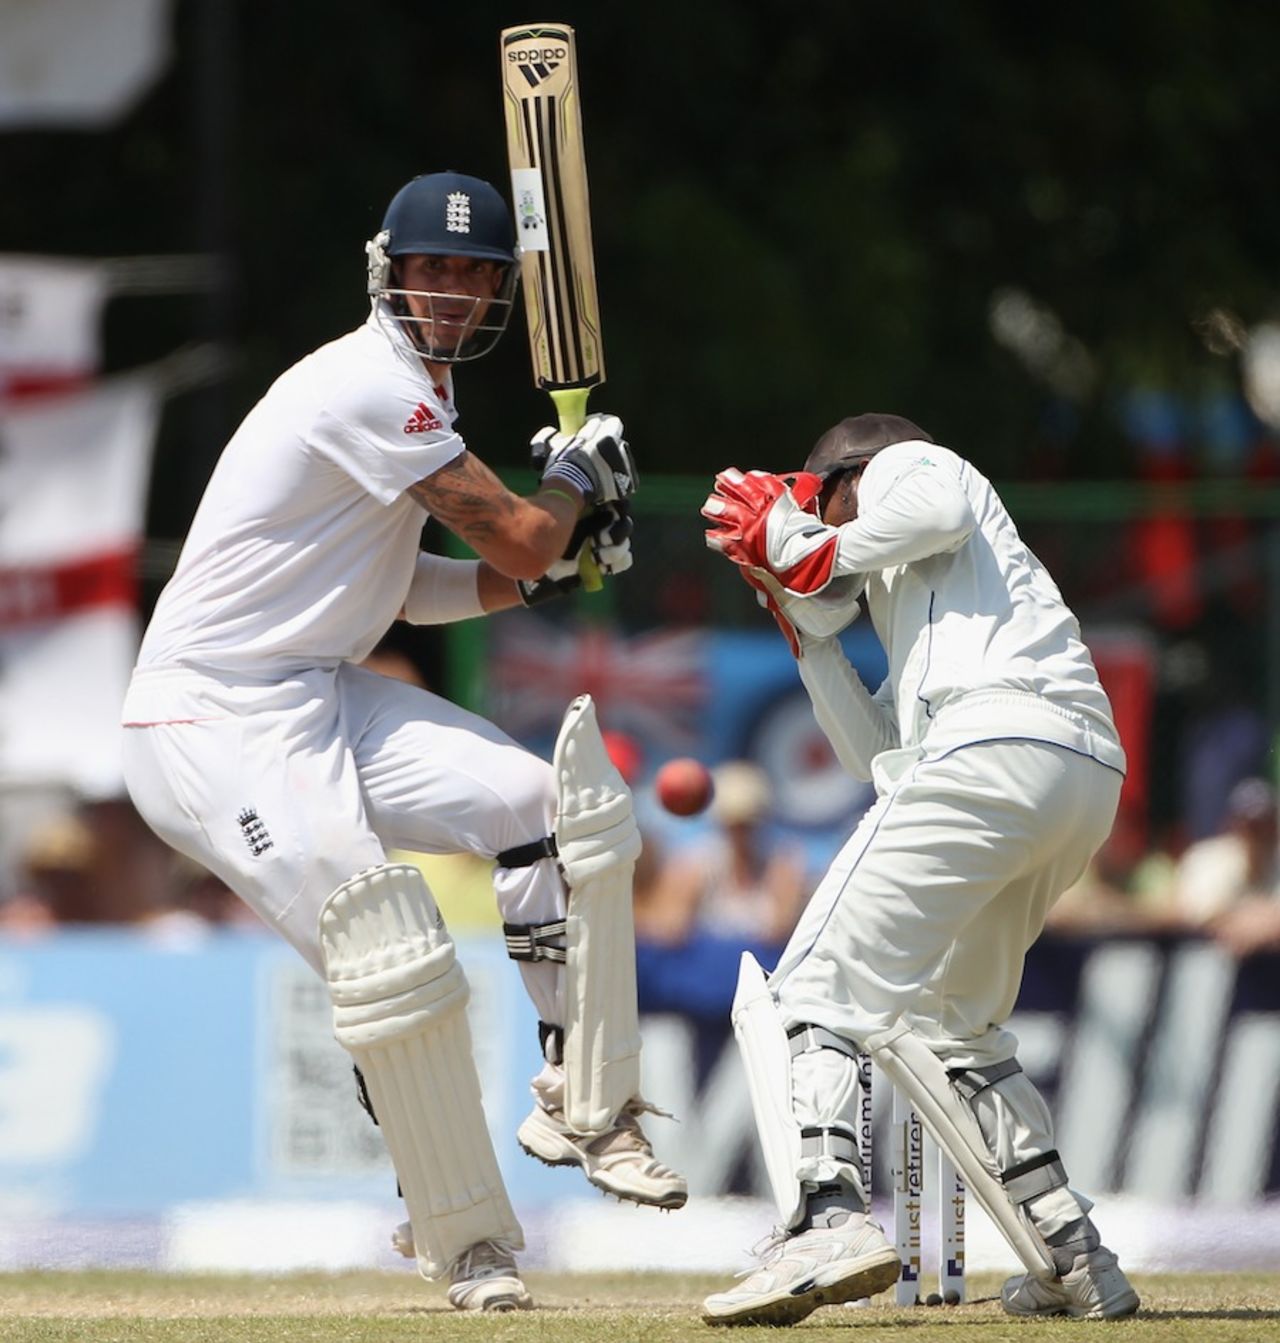 Kevin Pietersen plays the ball past the wicketkeeper, Sri Lanka v England, 2nd Test, Colombo, P Sara Oval, 3rd day, April 5, 2012